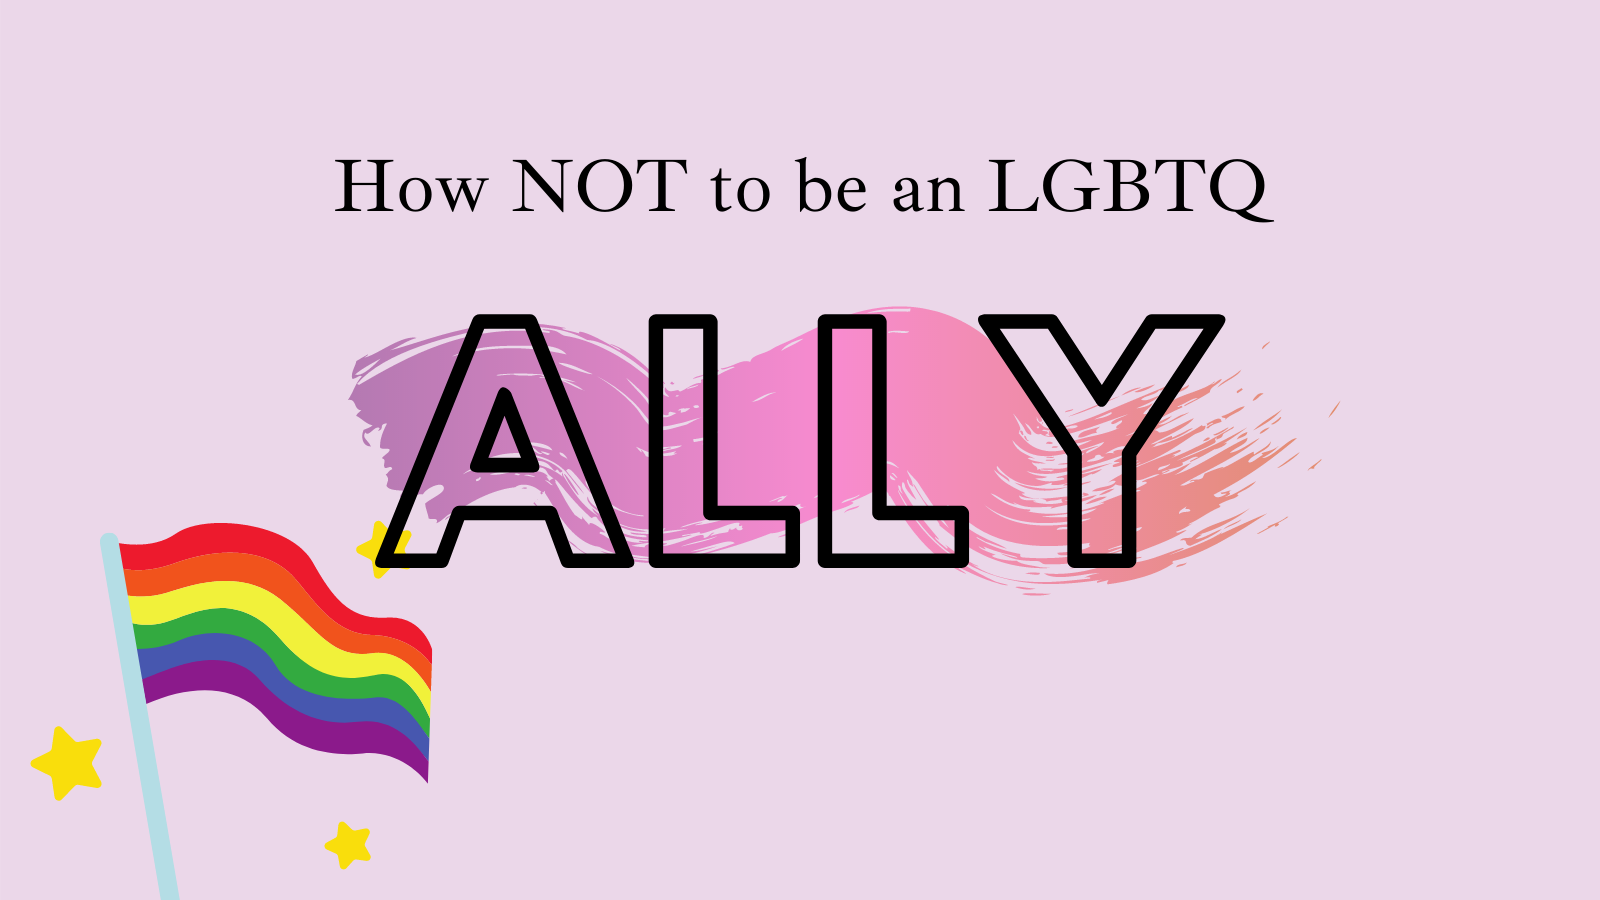 How NOT to be an LGBTQ Ally